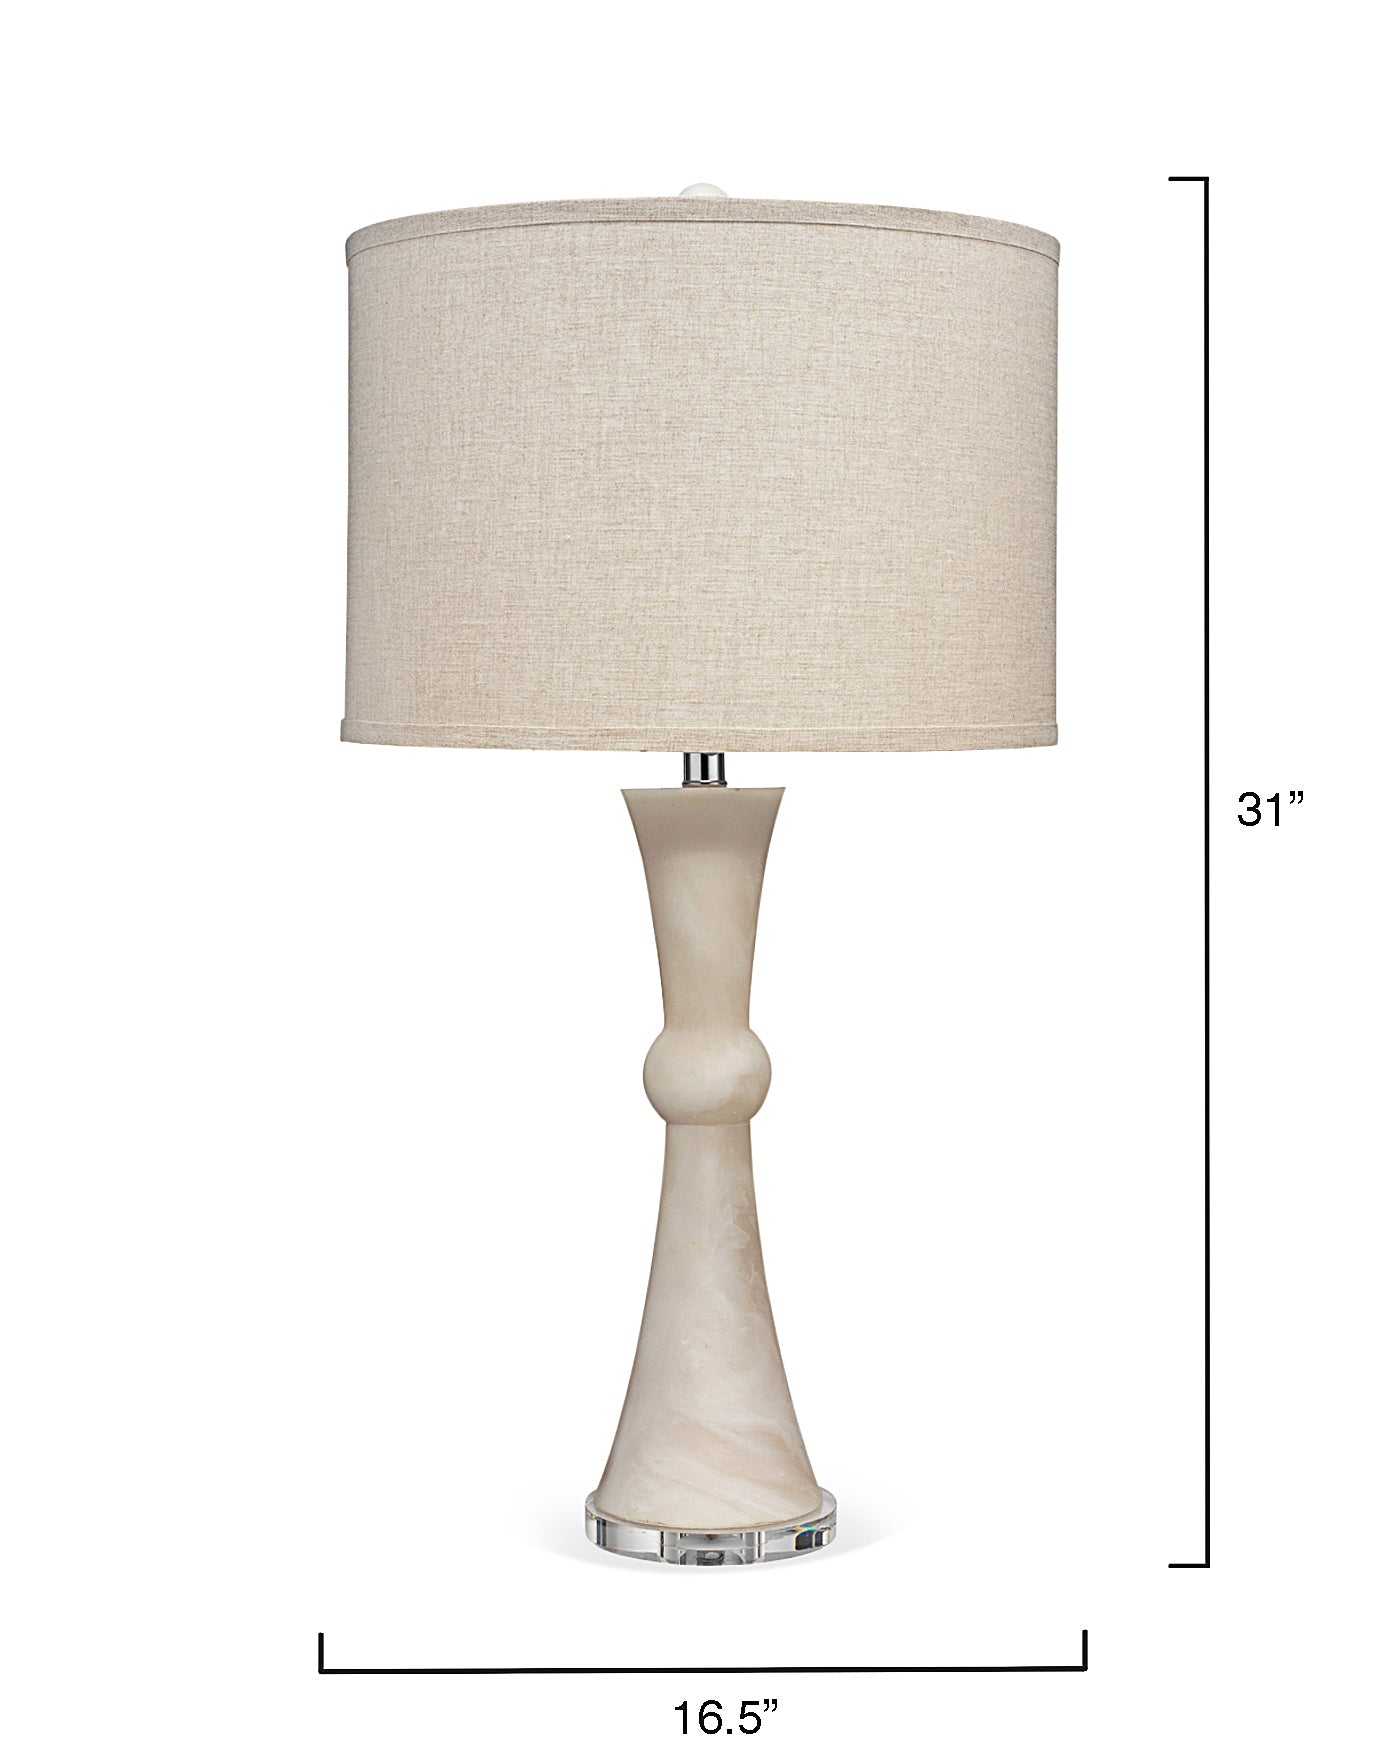 we-are-the-best-place-to-shop-commonwealth-table-lamp-supply_1.jpg